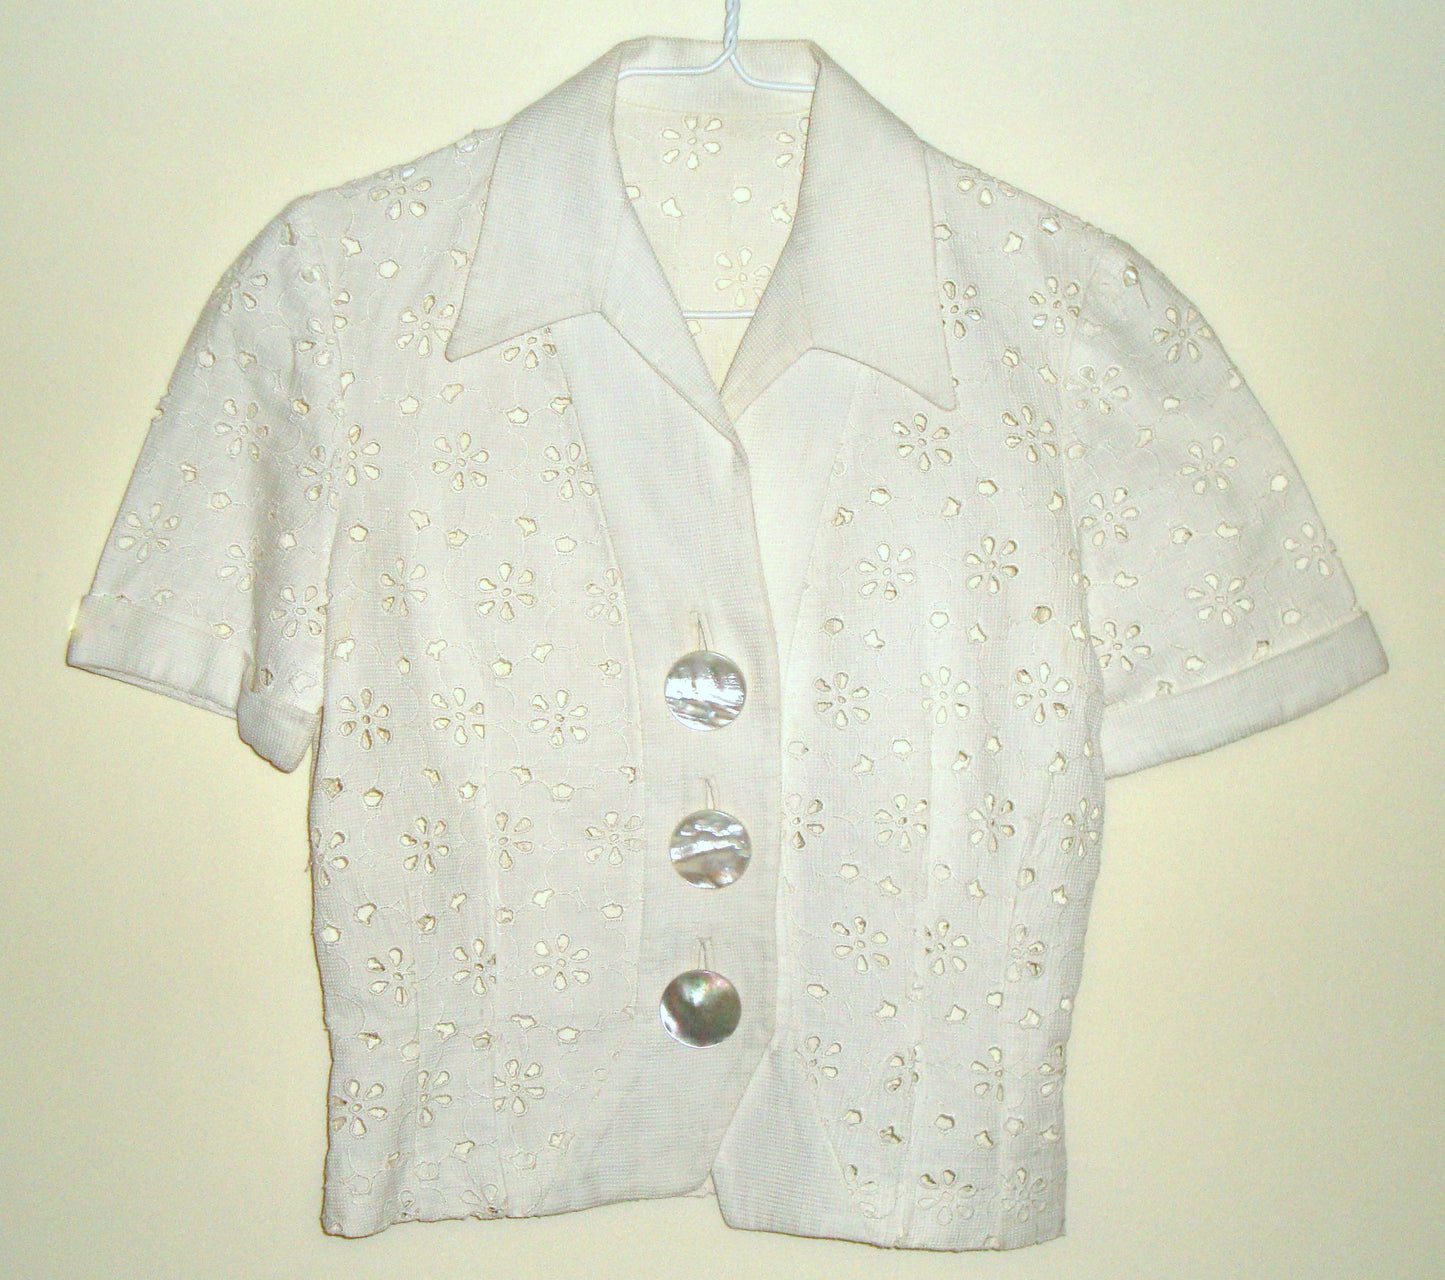 Vintage Antique White Eyelet Lace Deco Goth Skirt Suit Abby Essie